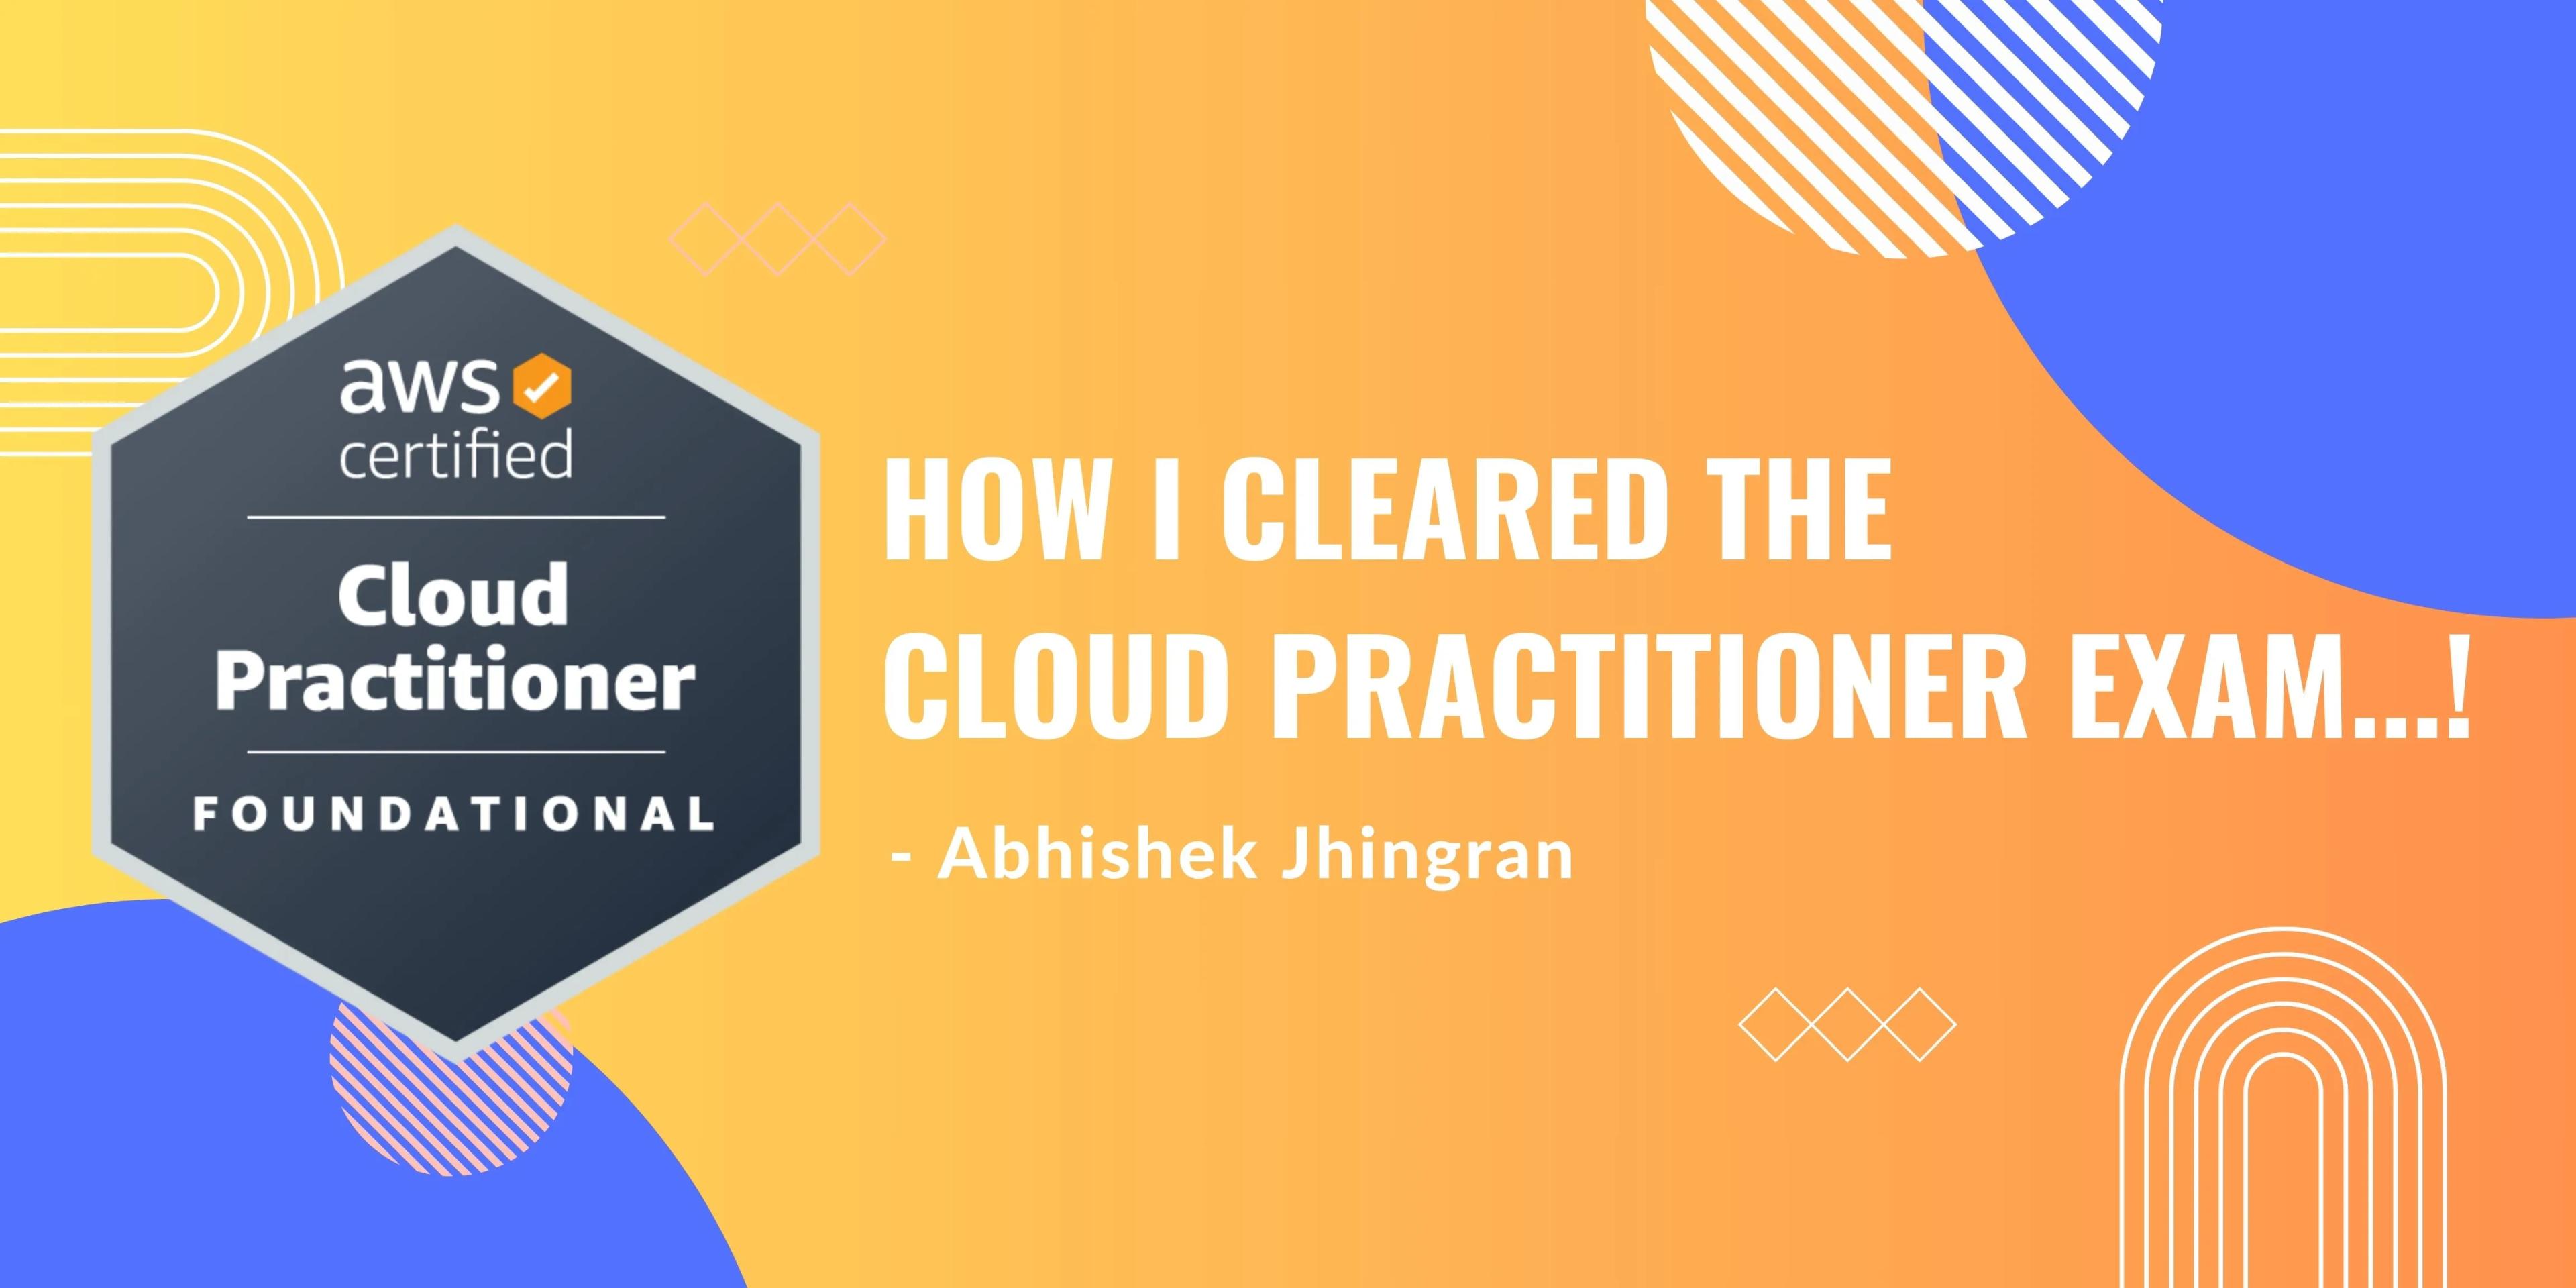 AWS Cloud Practitioner: How I Got Certified in 7 Days